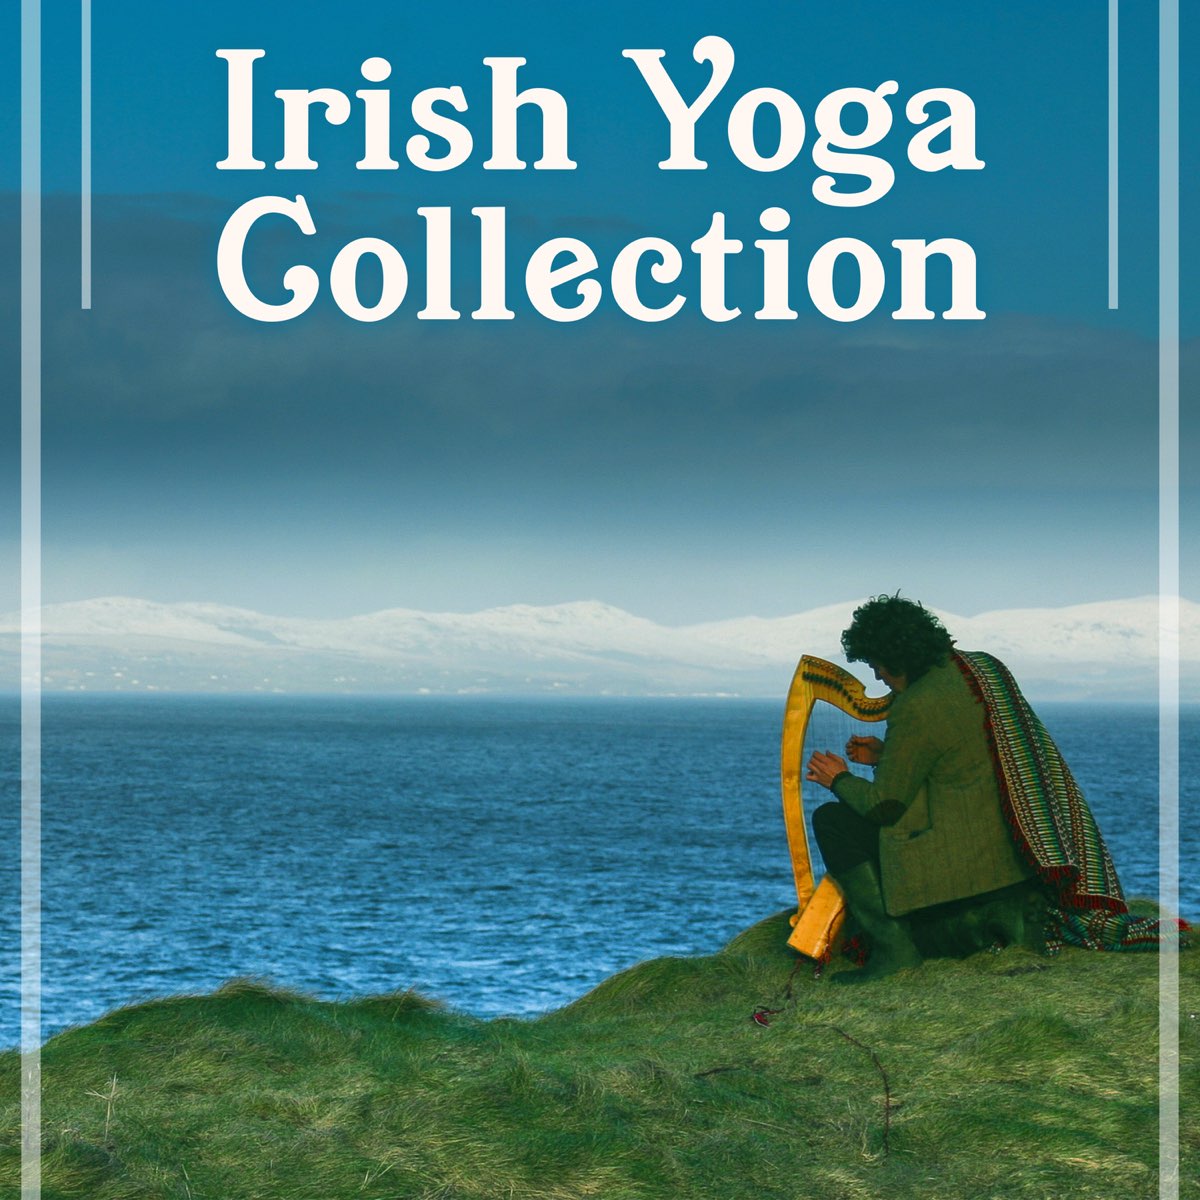 Irish Yoga Collection – Soft Relaxing Music, Flute and Harp, Bagpipe,  Celtic Music, Celtic Meditation, Gaelic Music - Album by Flute Music  Ensemble - Apple Music